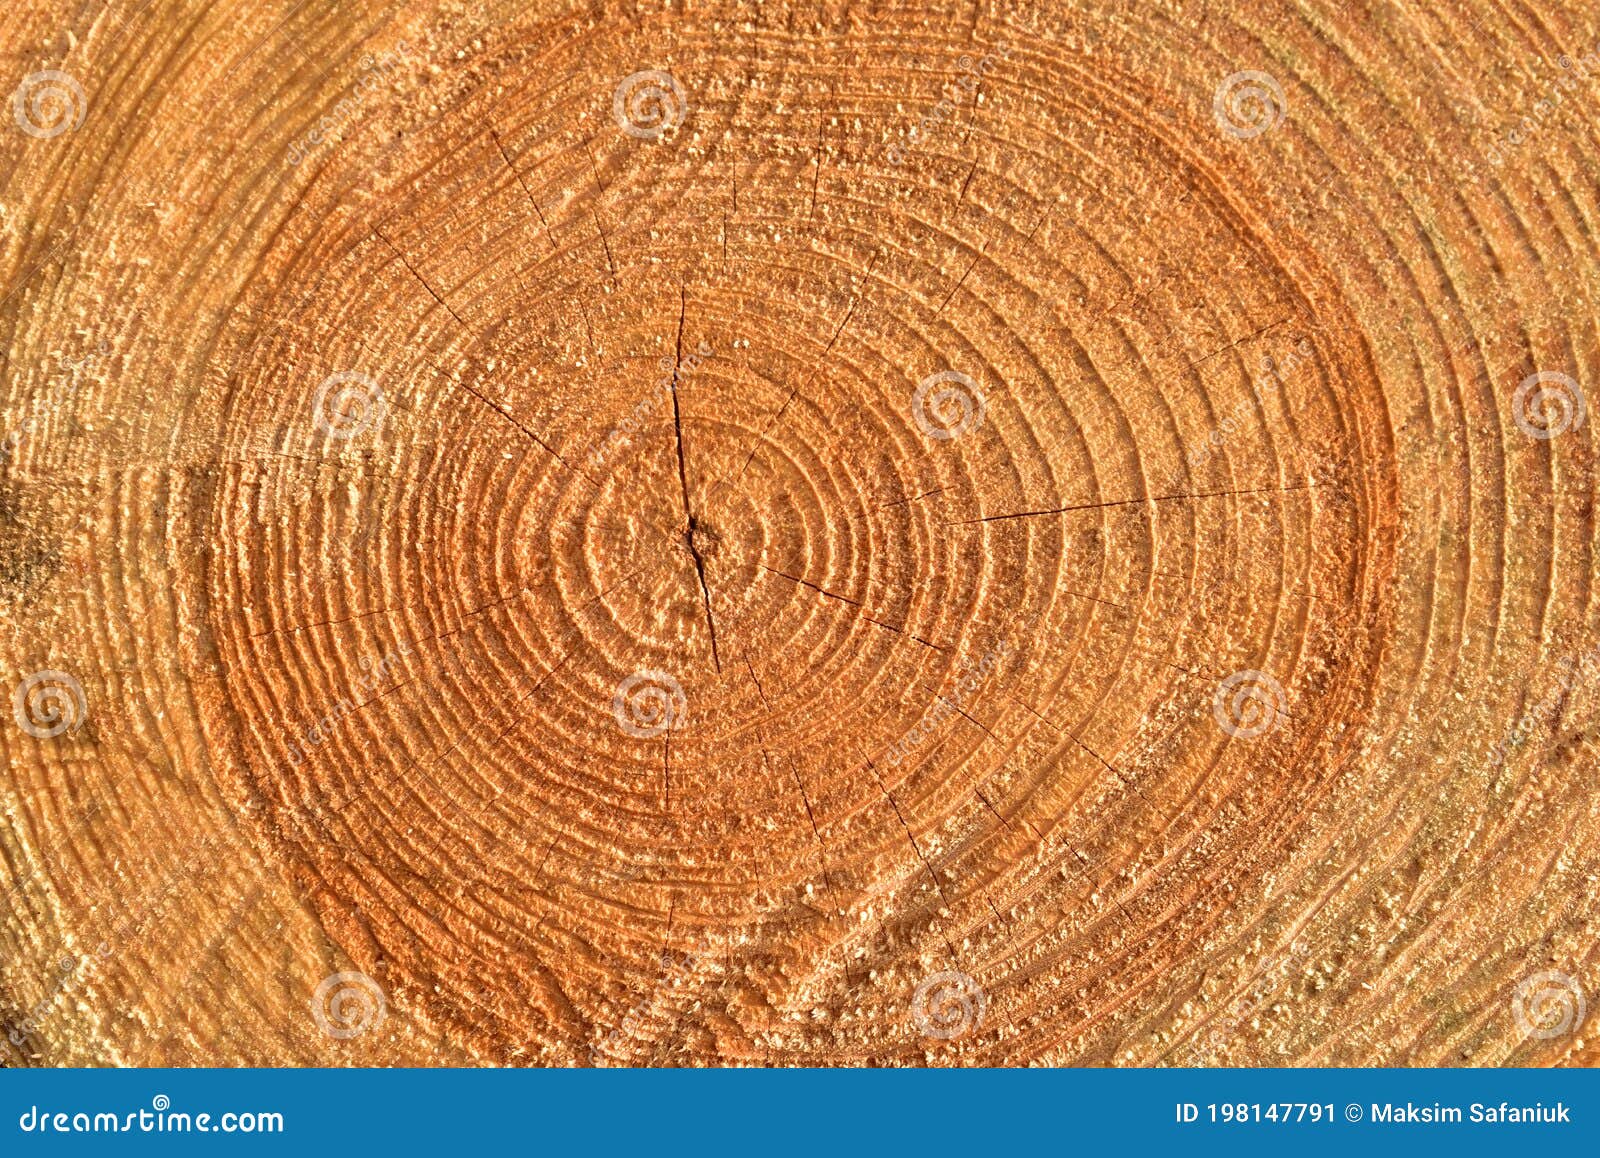 Gravity Engineers Academy - Gravity Nutshells... PITH/ MEDULLA – Innermost  central portion or core of a tree. Size varies from 1.5 – 10 mm HEART WOOD  – Inner annular rings surrounding the